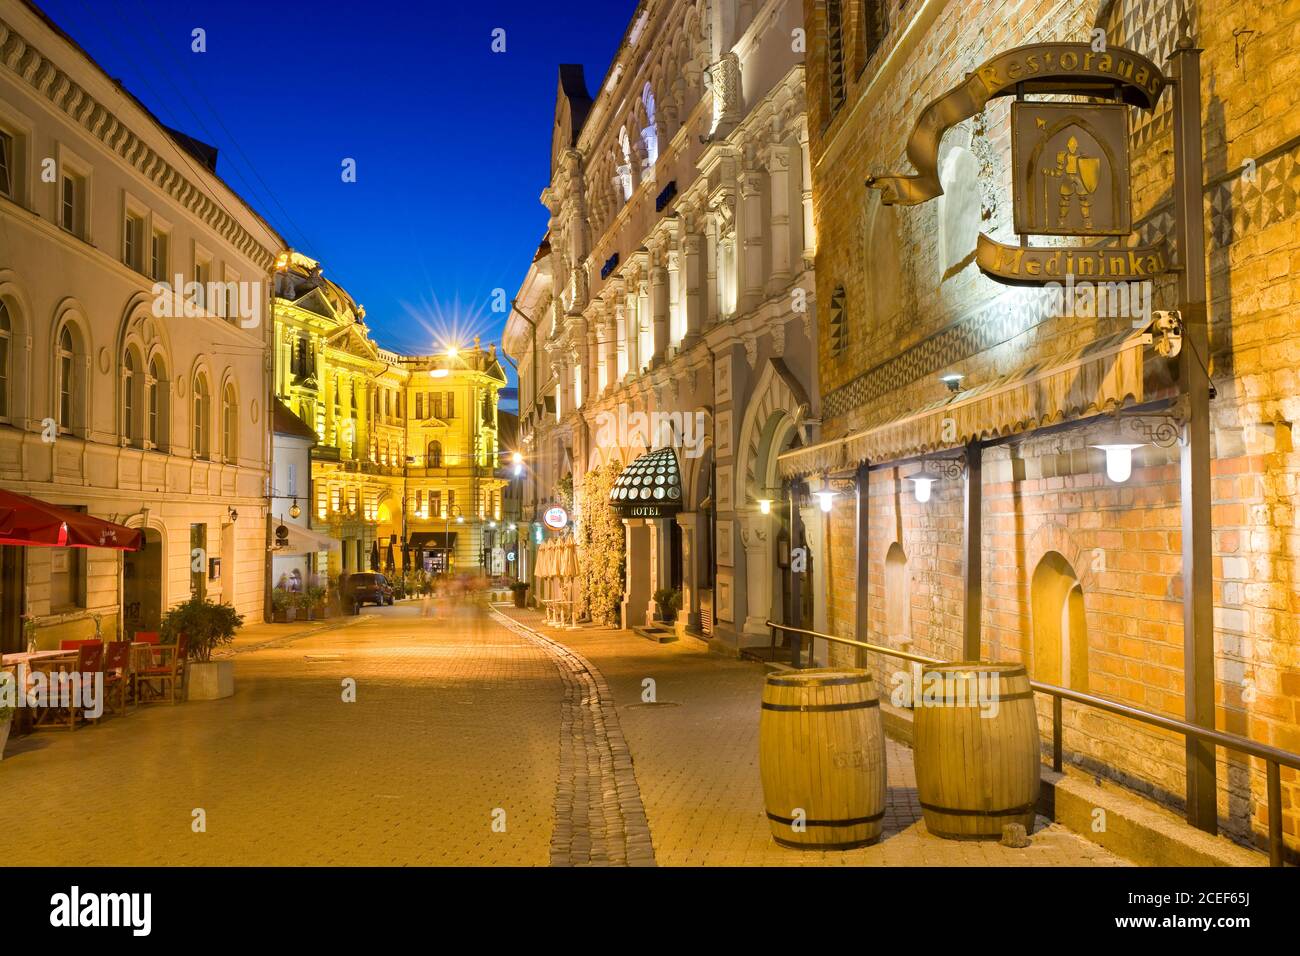 Night view of illuminated Ausros Vartu Street in the Old Town of Vilnius, Lithuania. Medininkai Restaurant and Royale Hotel on the right. Lithuanian N Stock Photo